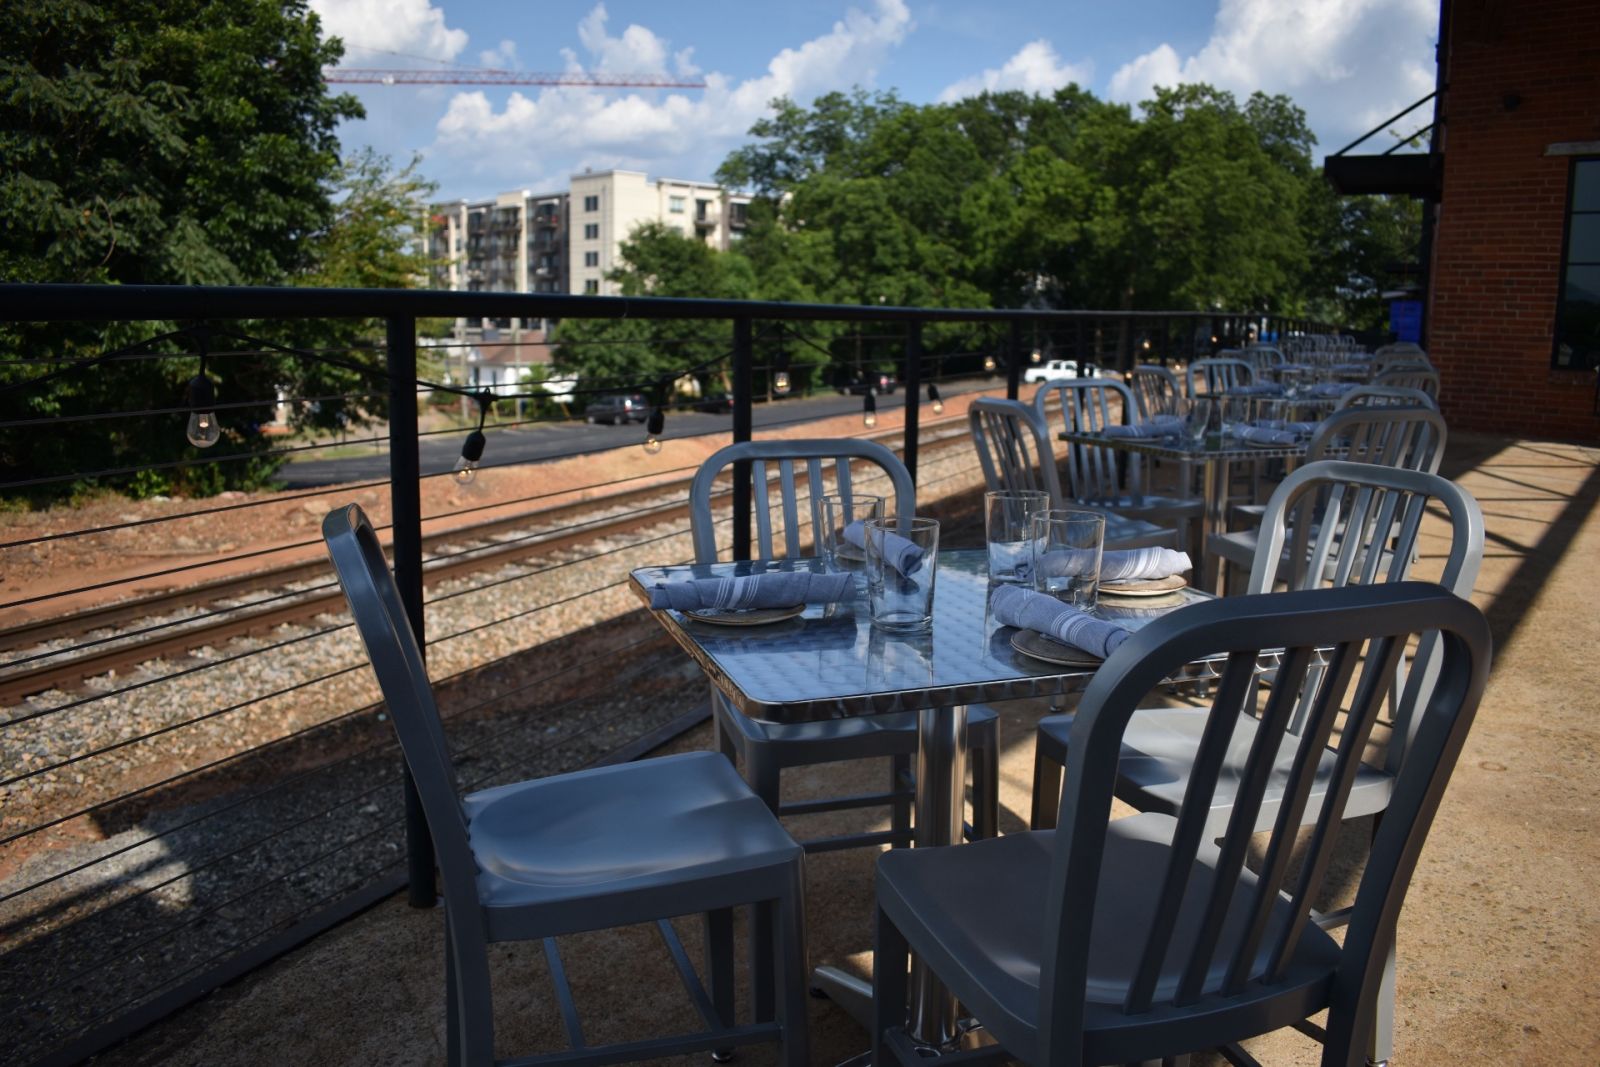 A view from Urban Wren's patio seating at Markley Station overlooks the Greenville skyline. (Photo/Molly Hulsey)